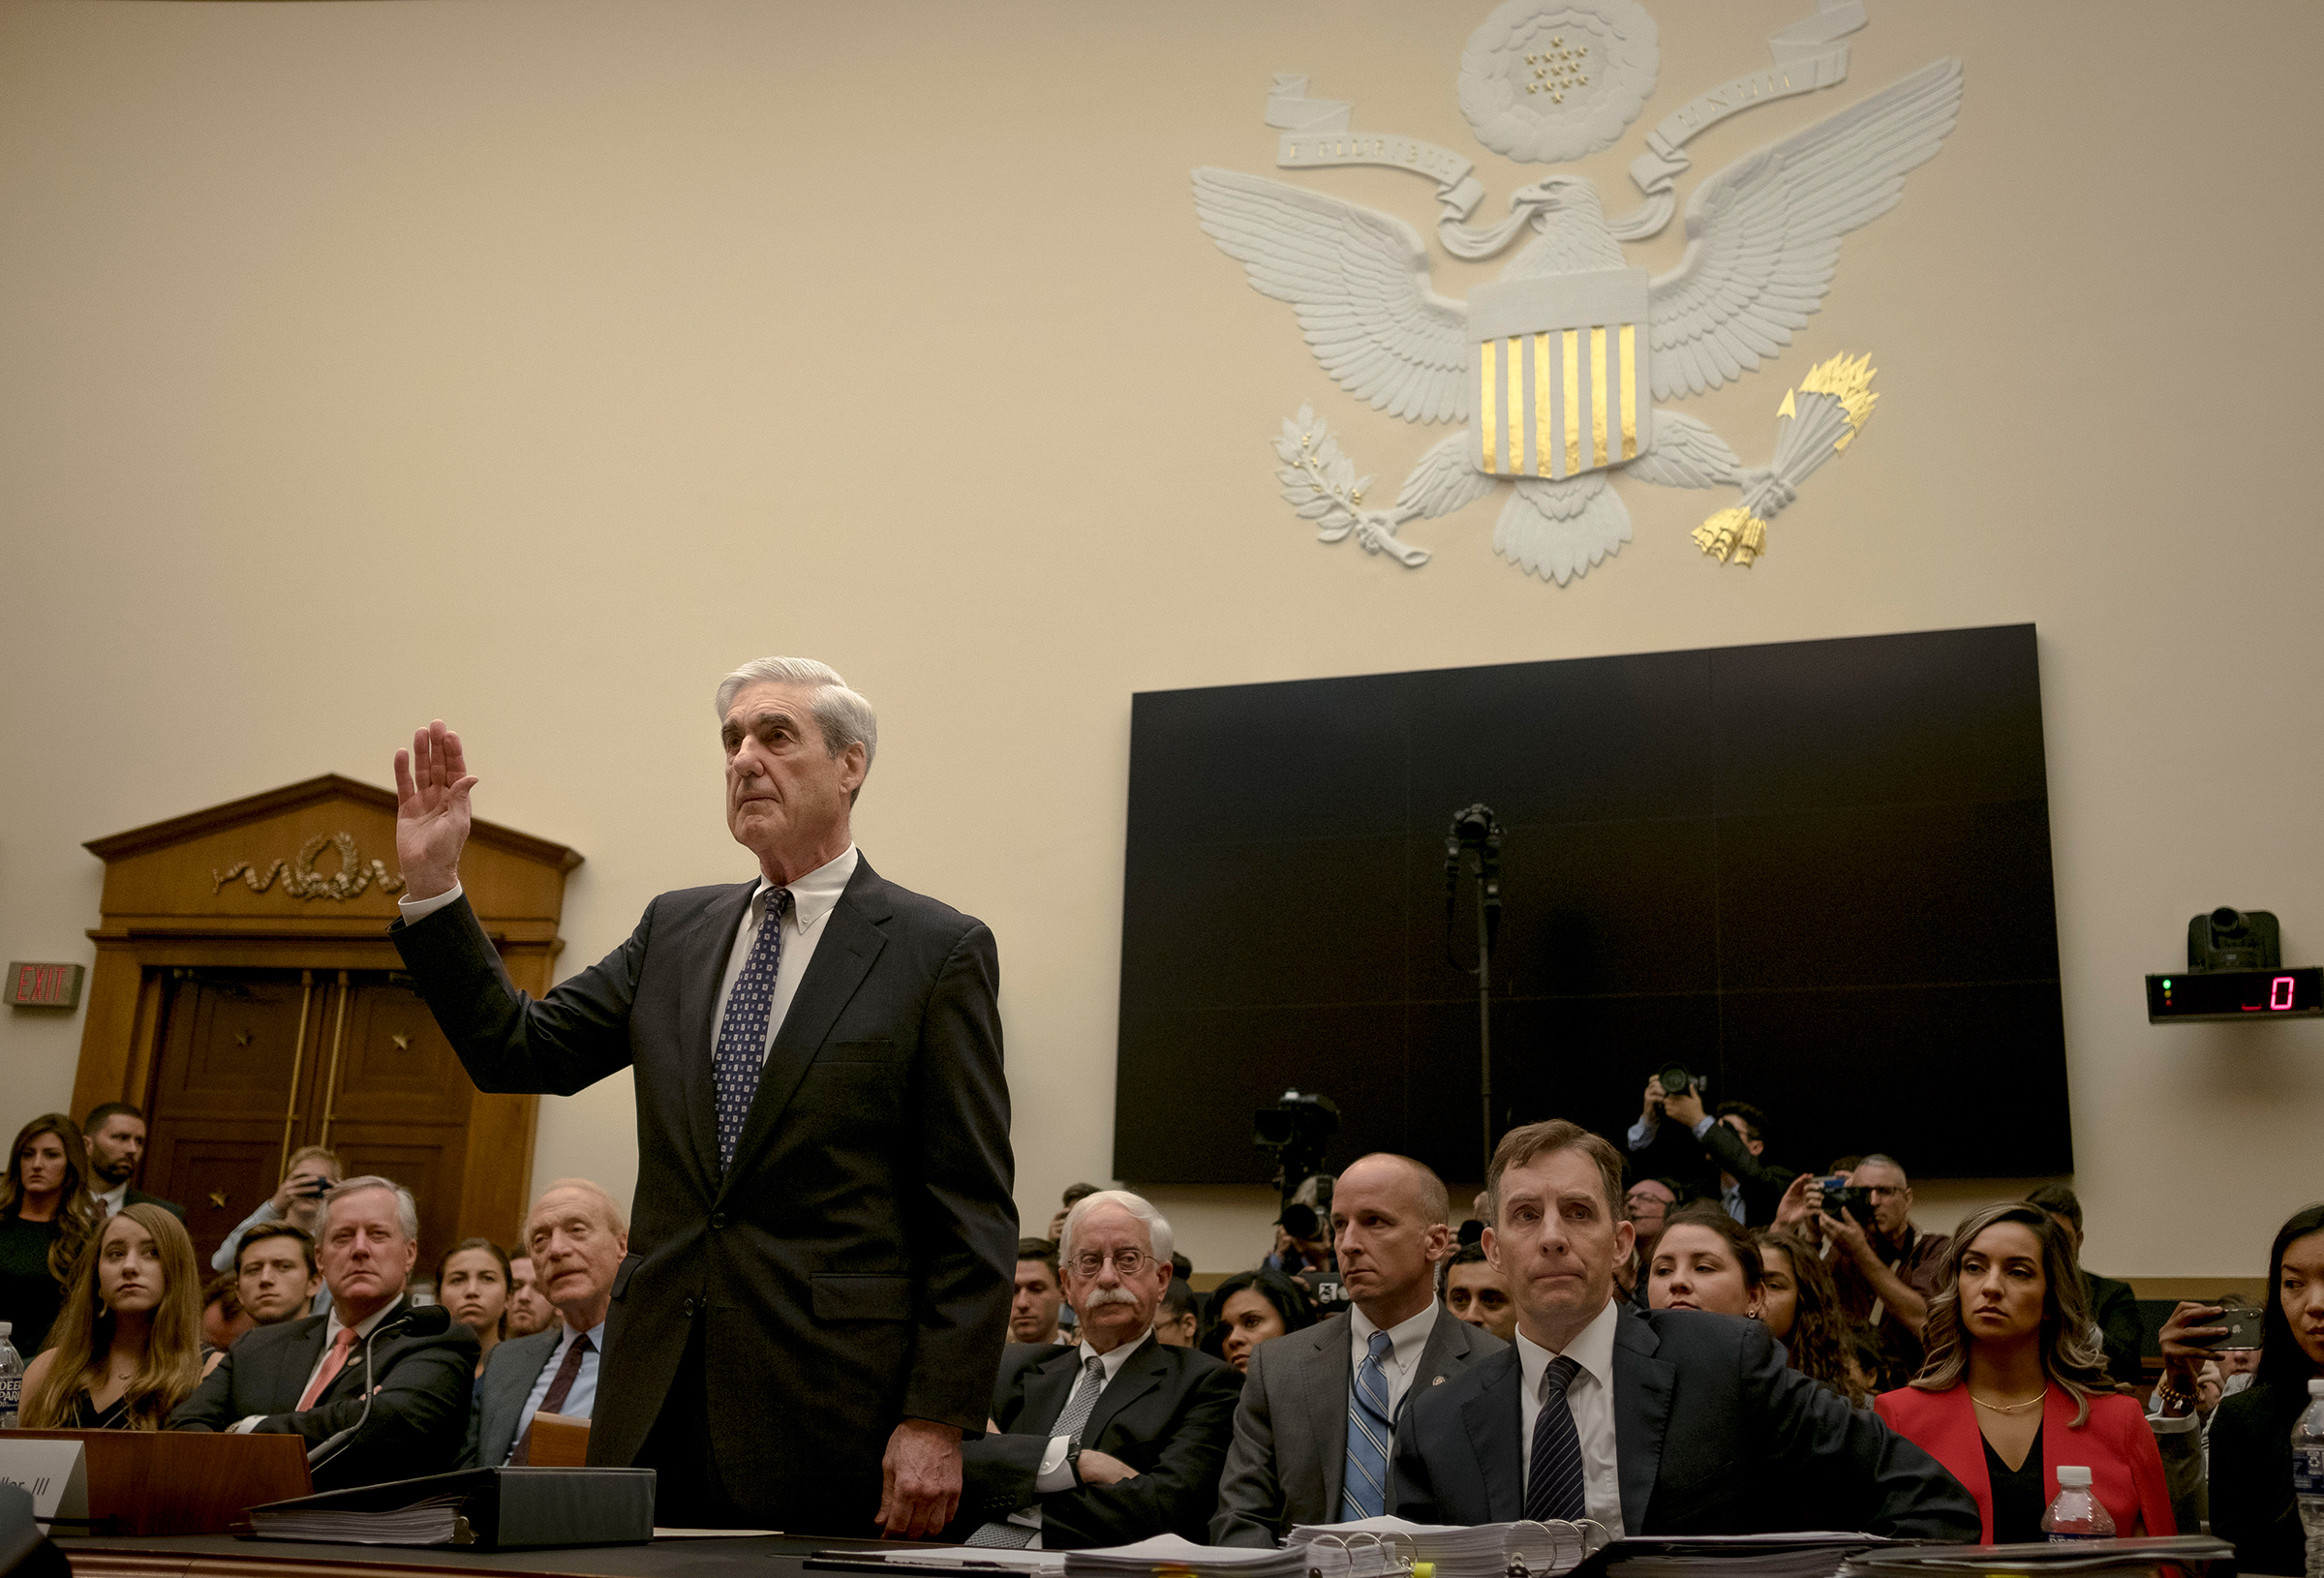 Mueller is sworn in before the House Judiciary Committee. (Gabriella Demczuk for TIME)